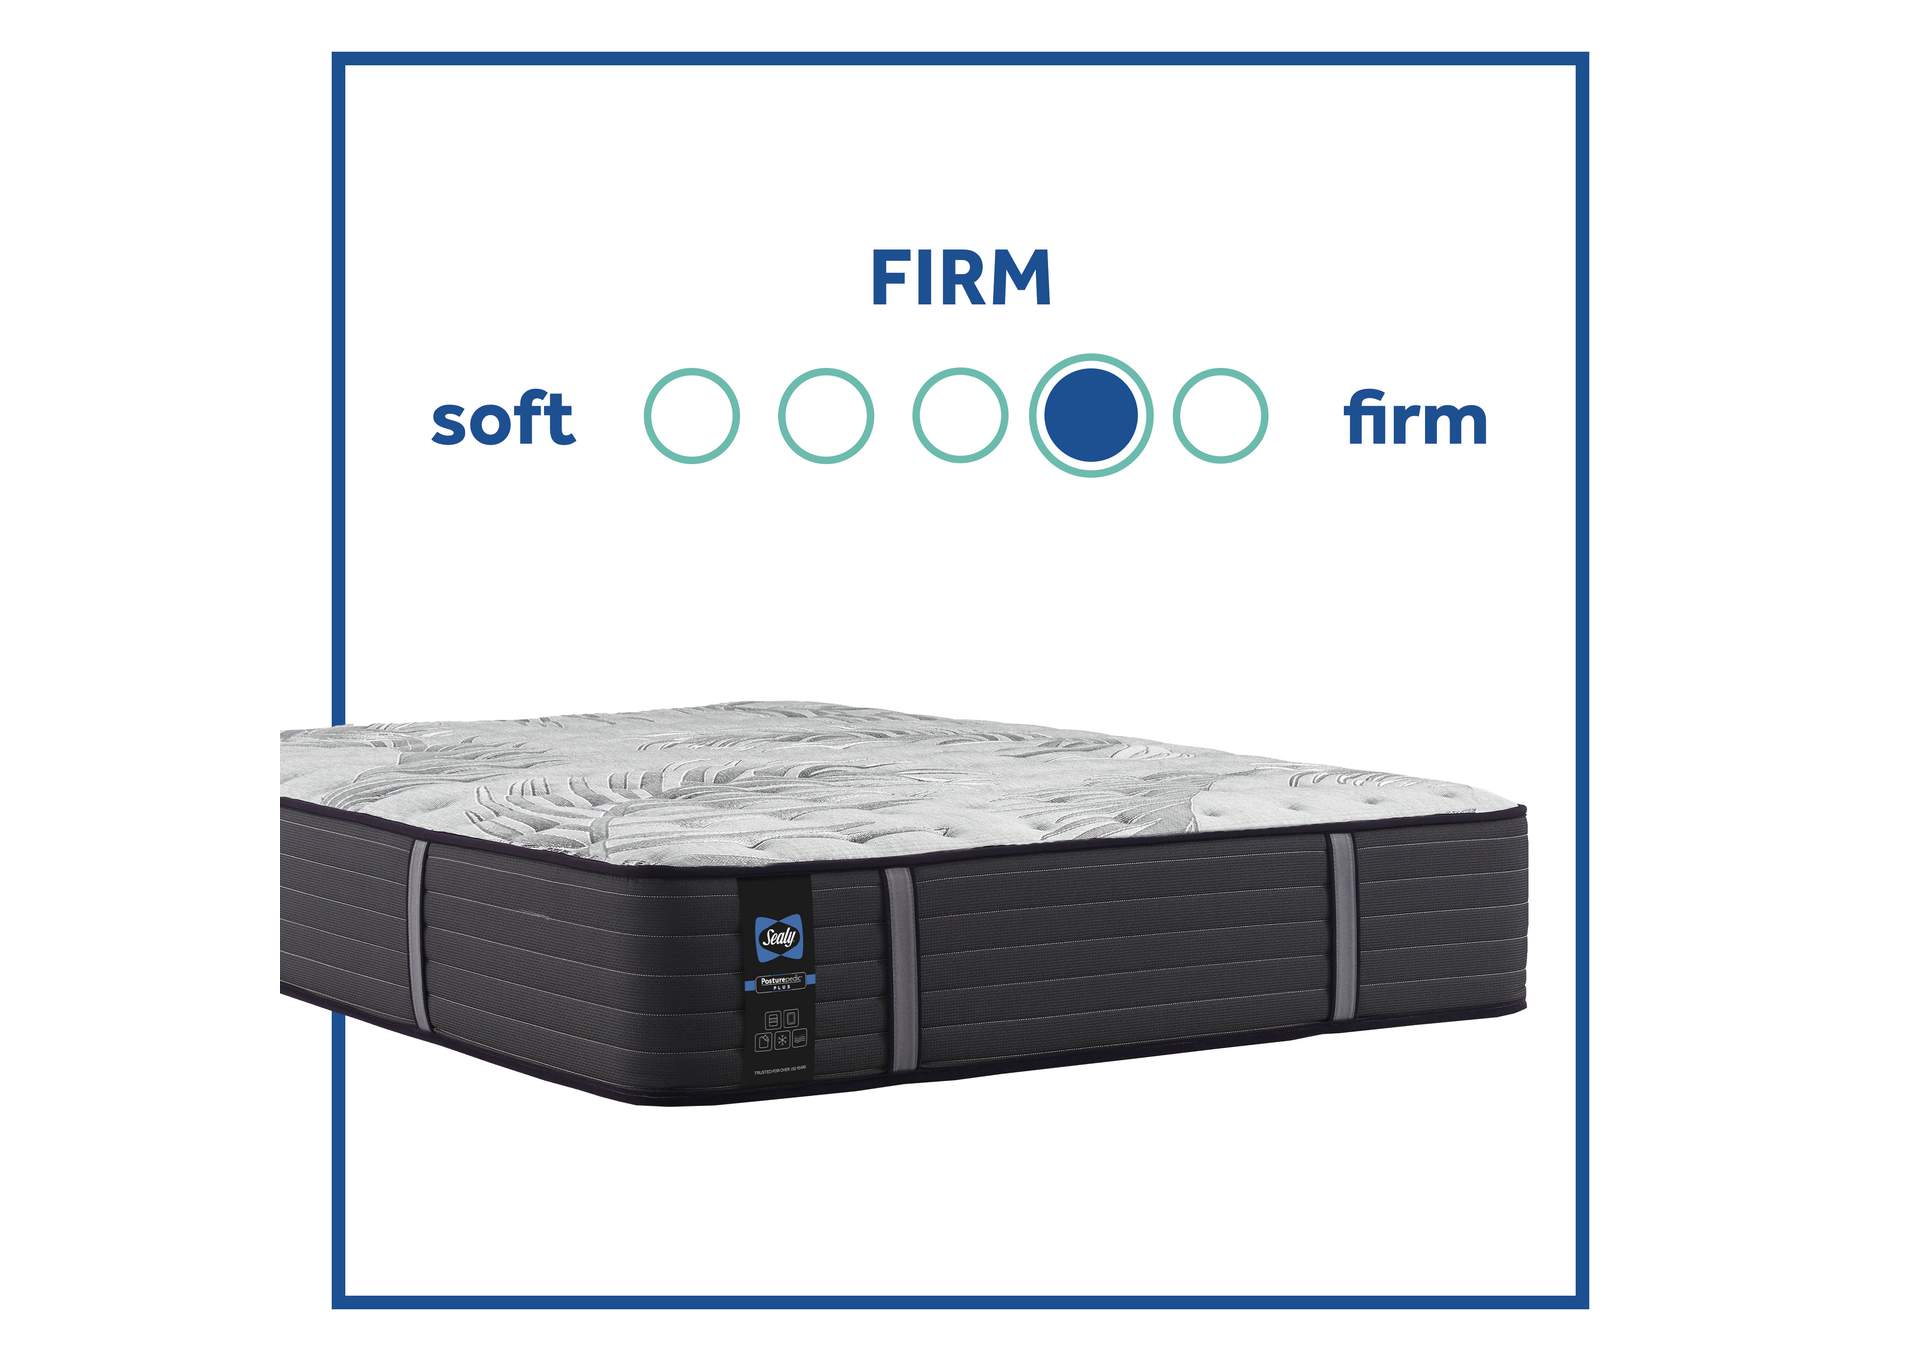 Victorious II Firm Tight Top Twin Mattress,Sealy